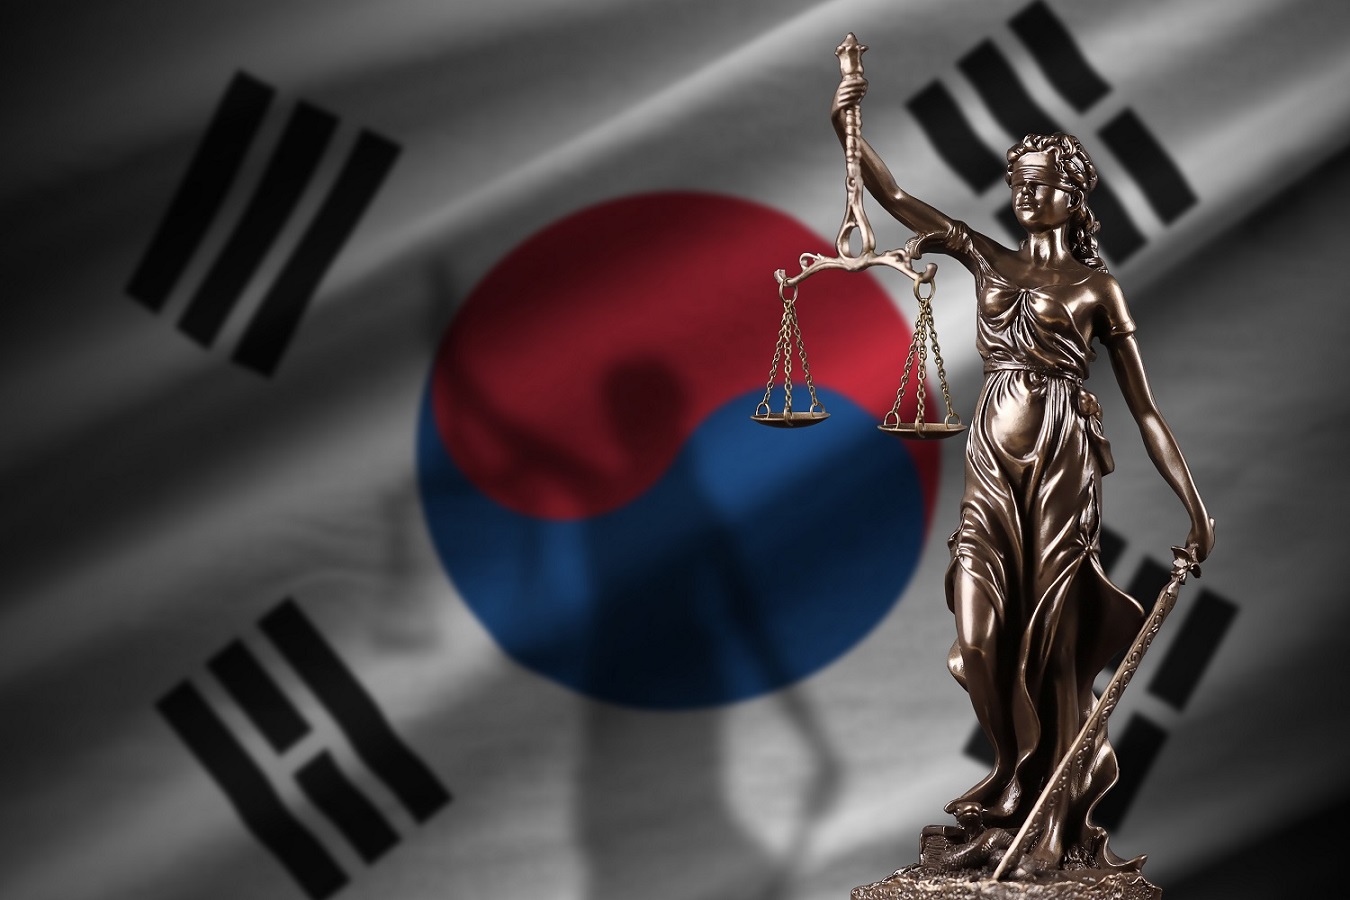 A statue of Lady Justice, blindfolded and holding scales and a sword, in front of a South Korean flag.